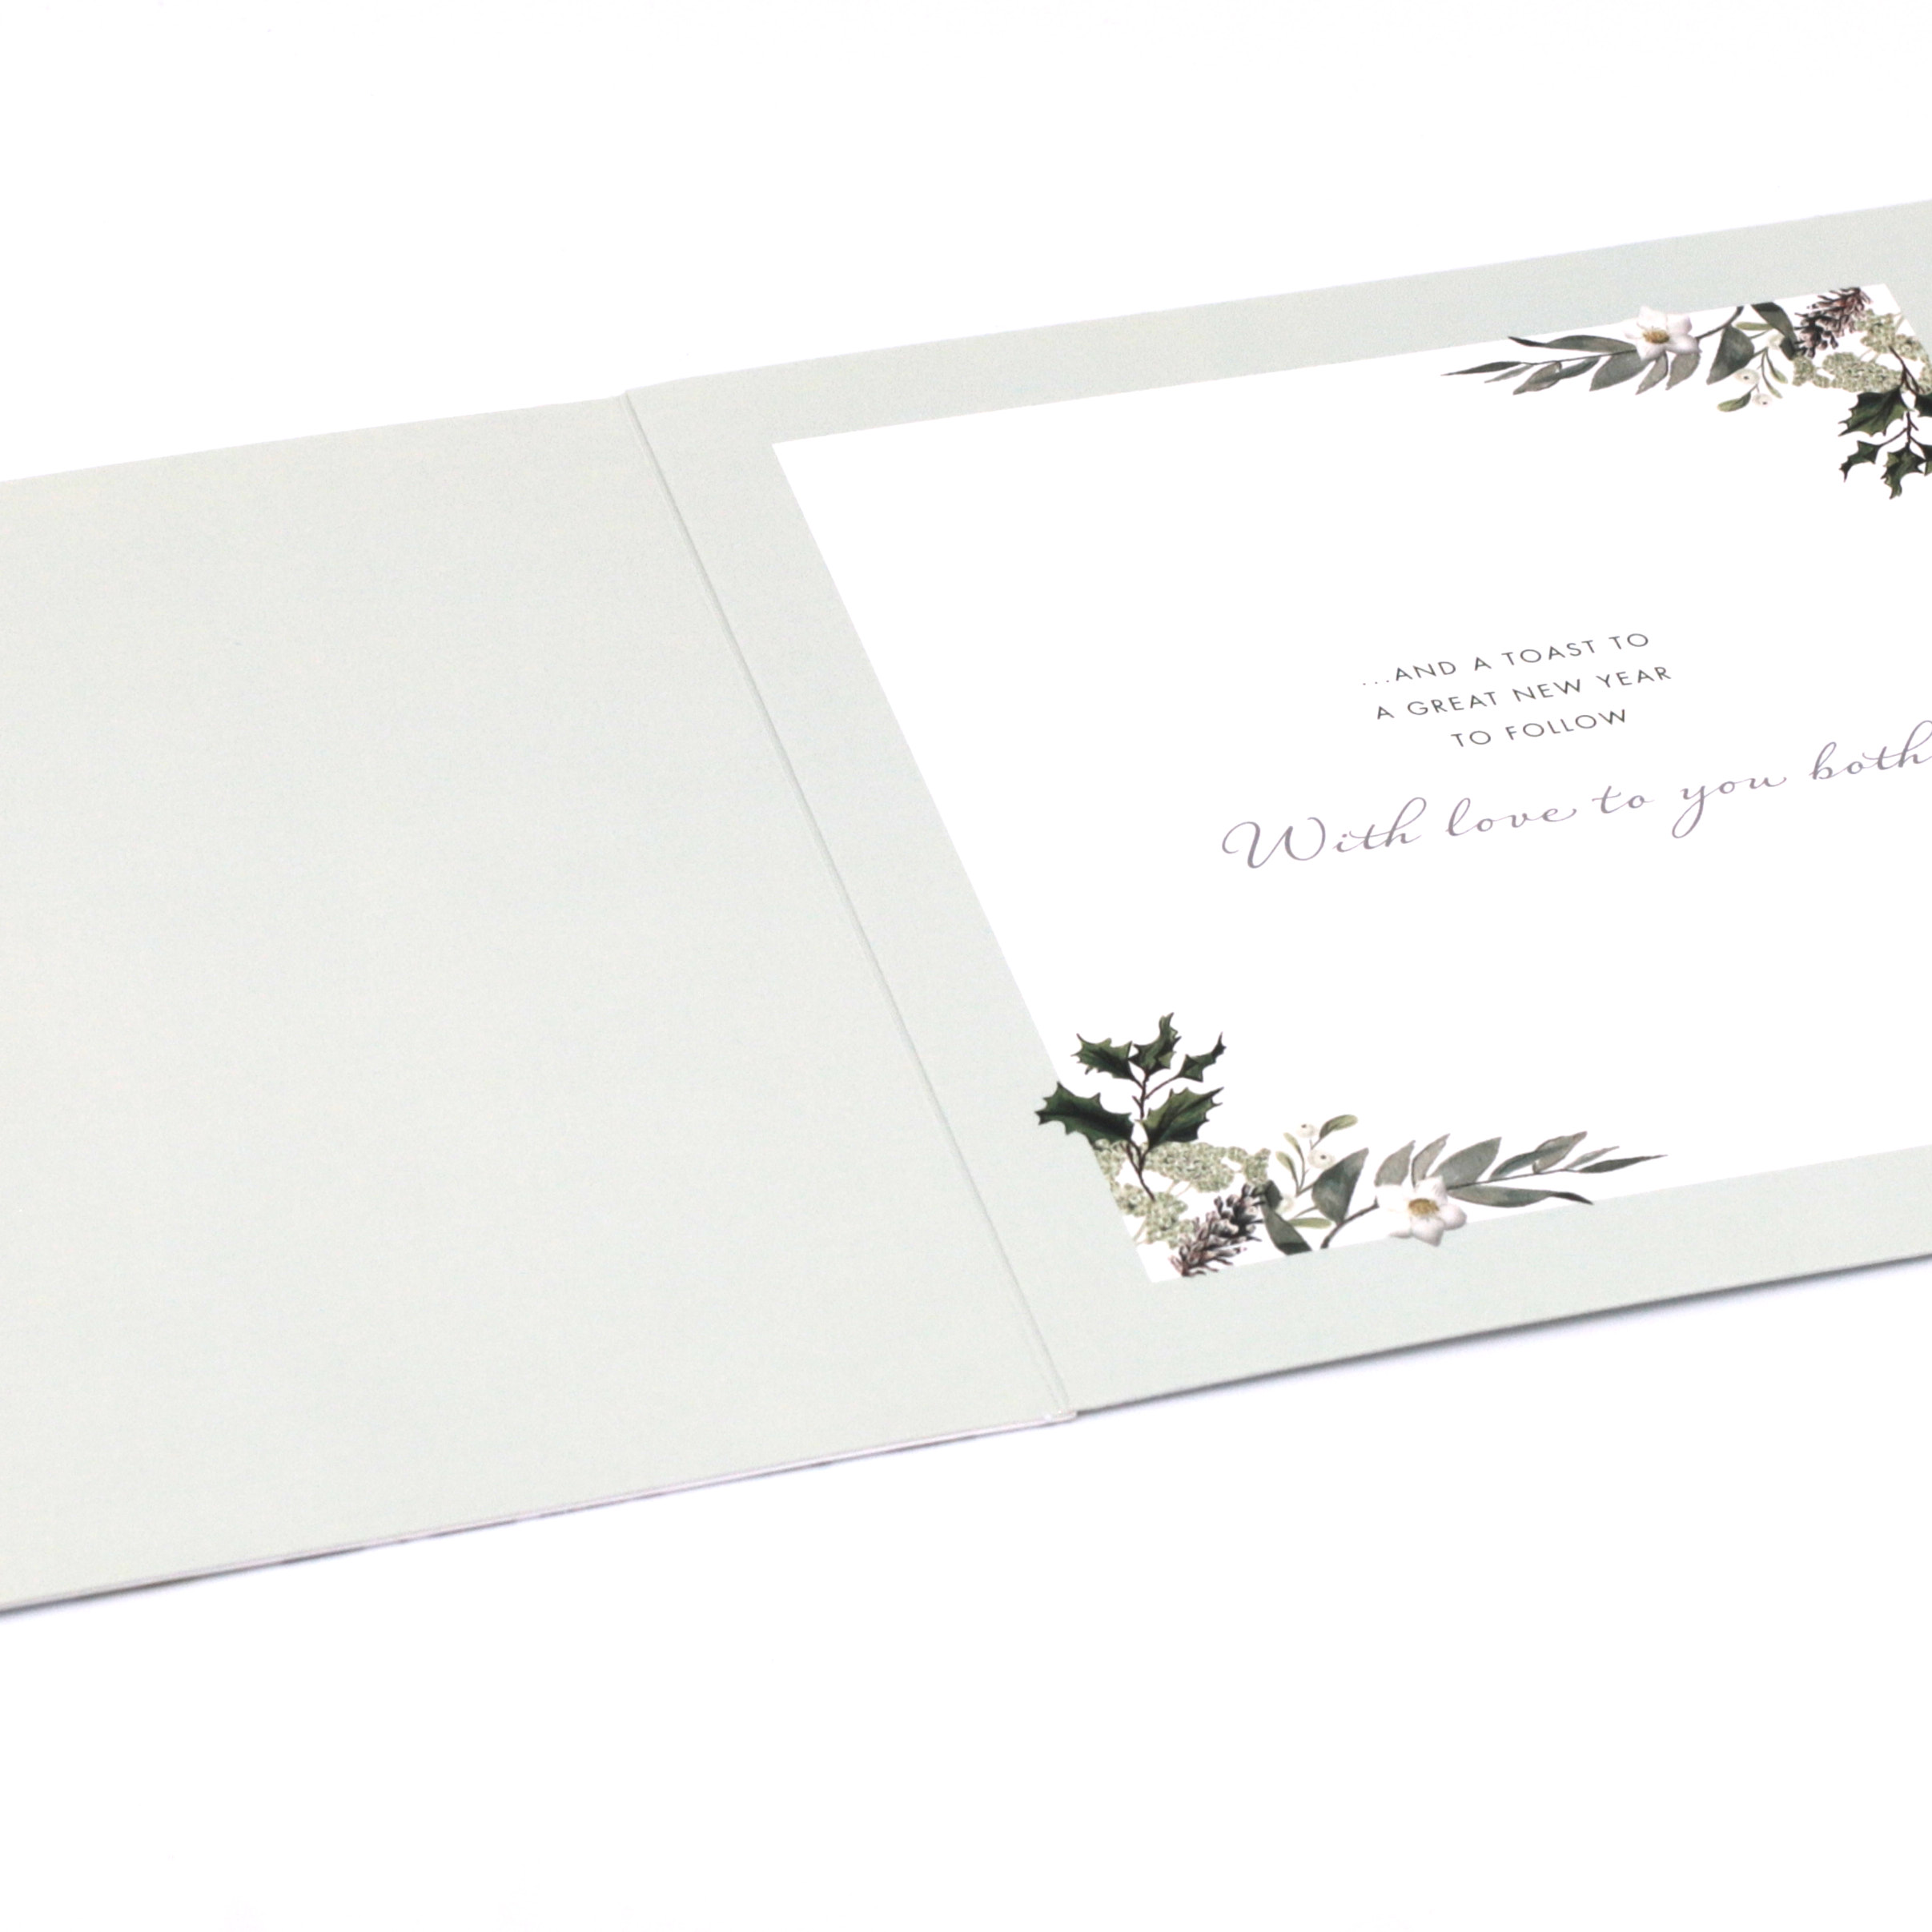 Boutique Christmas Card - Sister And Brother-In-Law, Wonderful Christmas